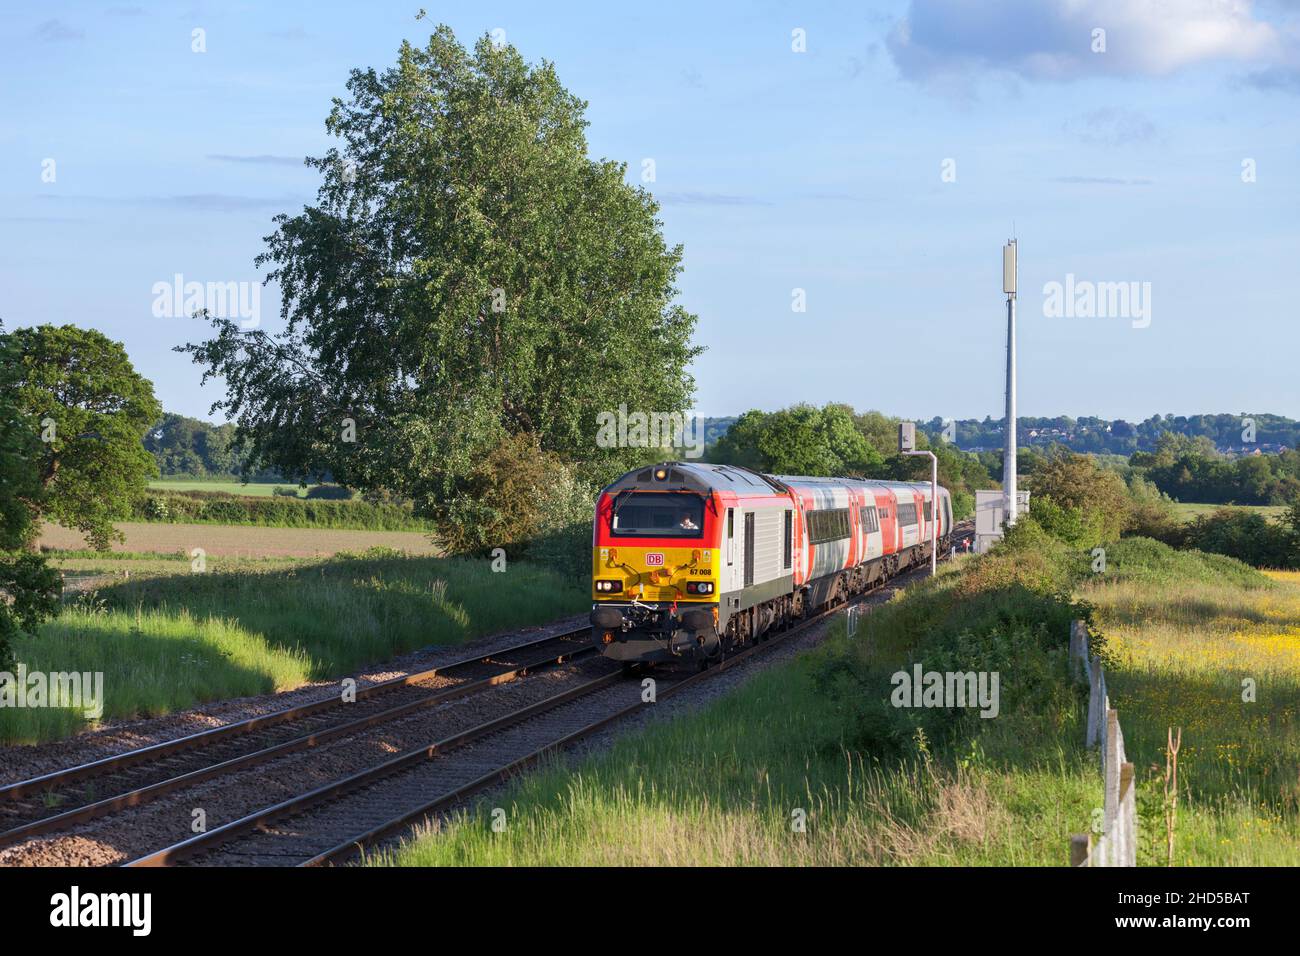 The Gerald of Wales Holyhead to Cardiff 'WAG' express (1716 Cardiff  to Holyhead ) passing Pulford (north of Wrexham) with a DB cargo class 67 loco Stock Photo